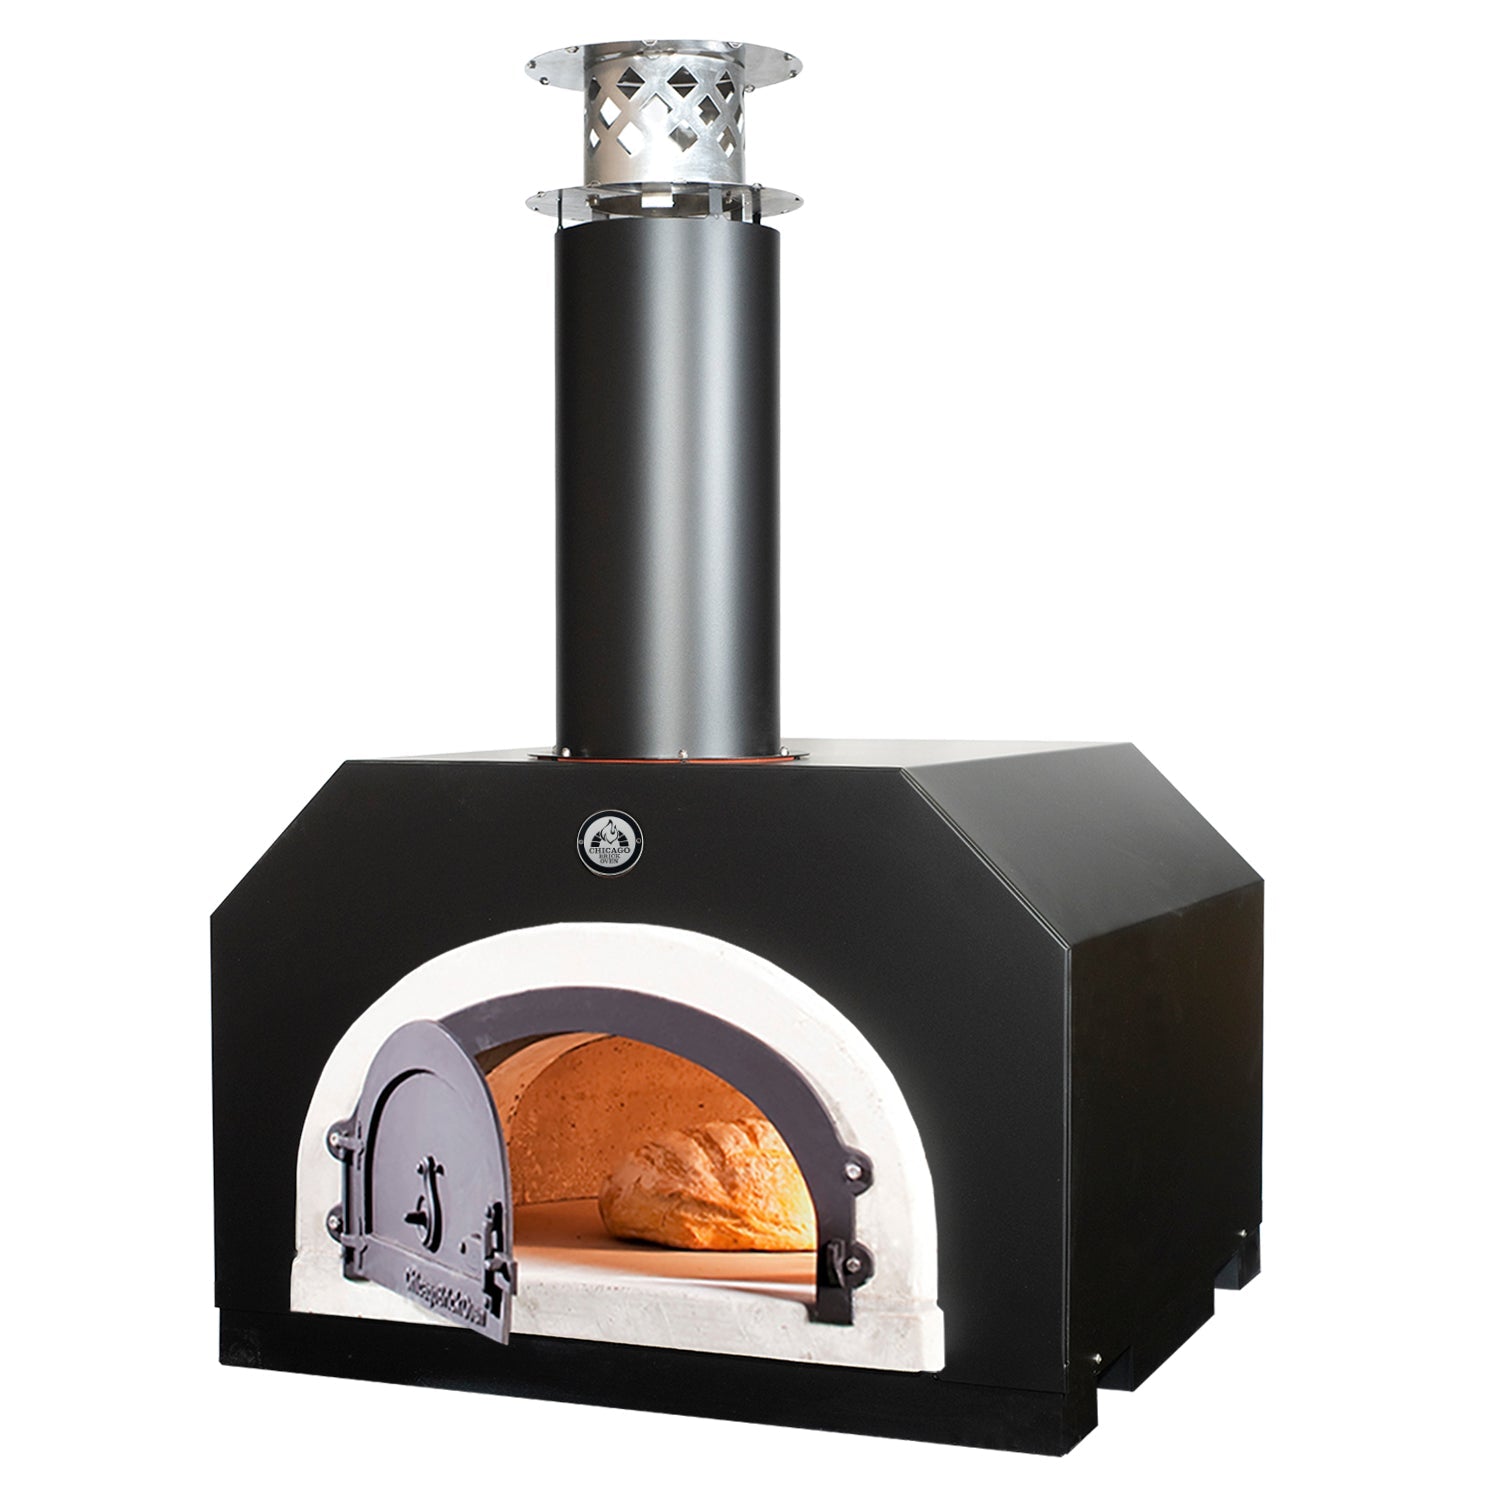 Chicago Brick Oven 750 Countertop | Wood Fired Pizza Oven | 38" x 28" Cooking Surface